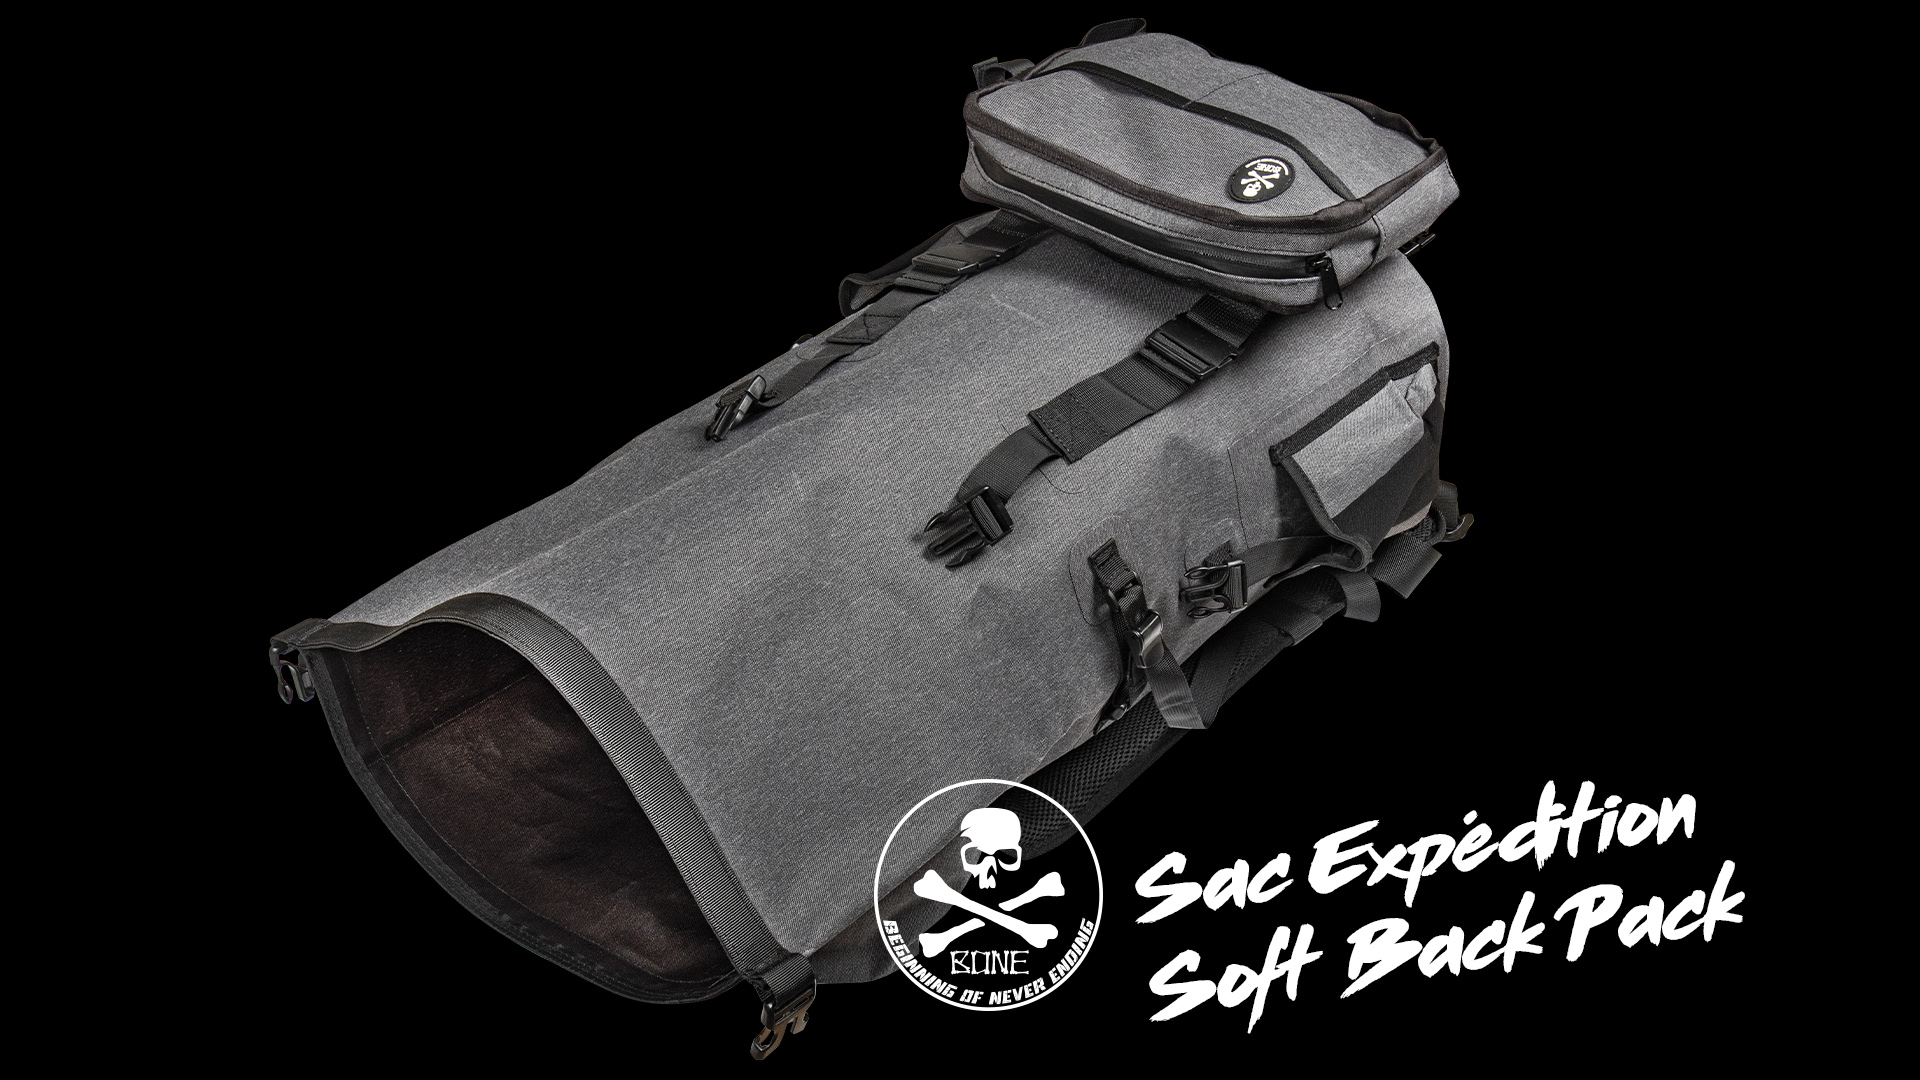 Bone Expedition Soft Back Pack 30L – Way Of Fishing